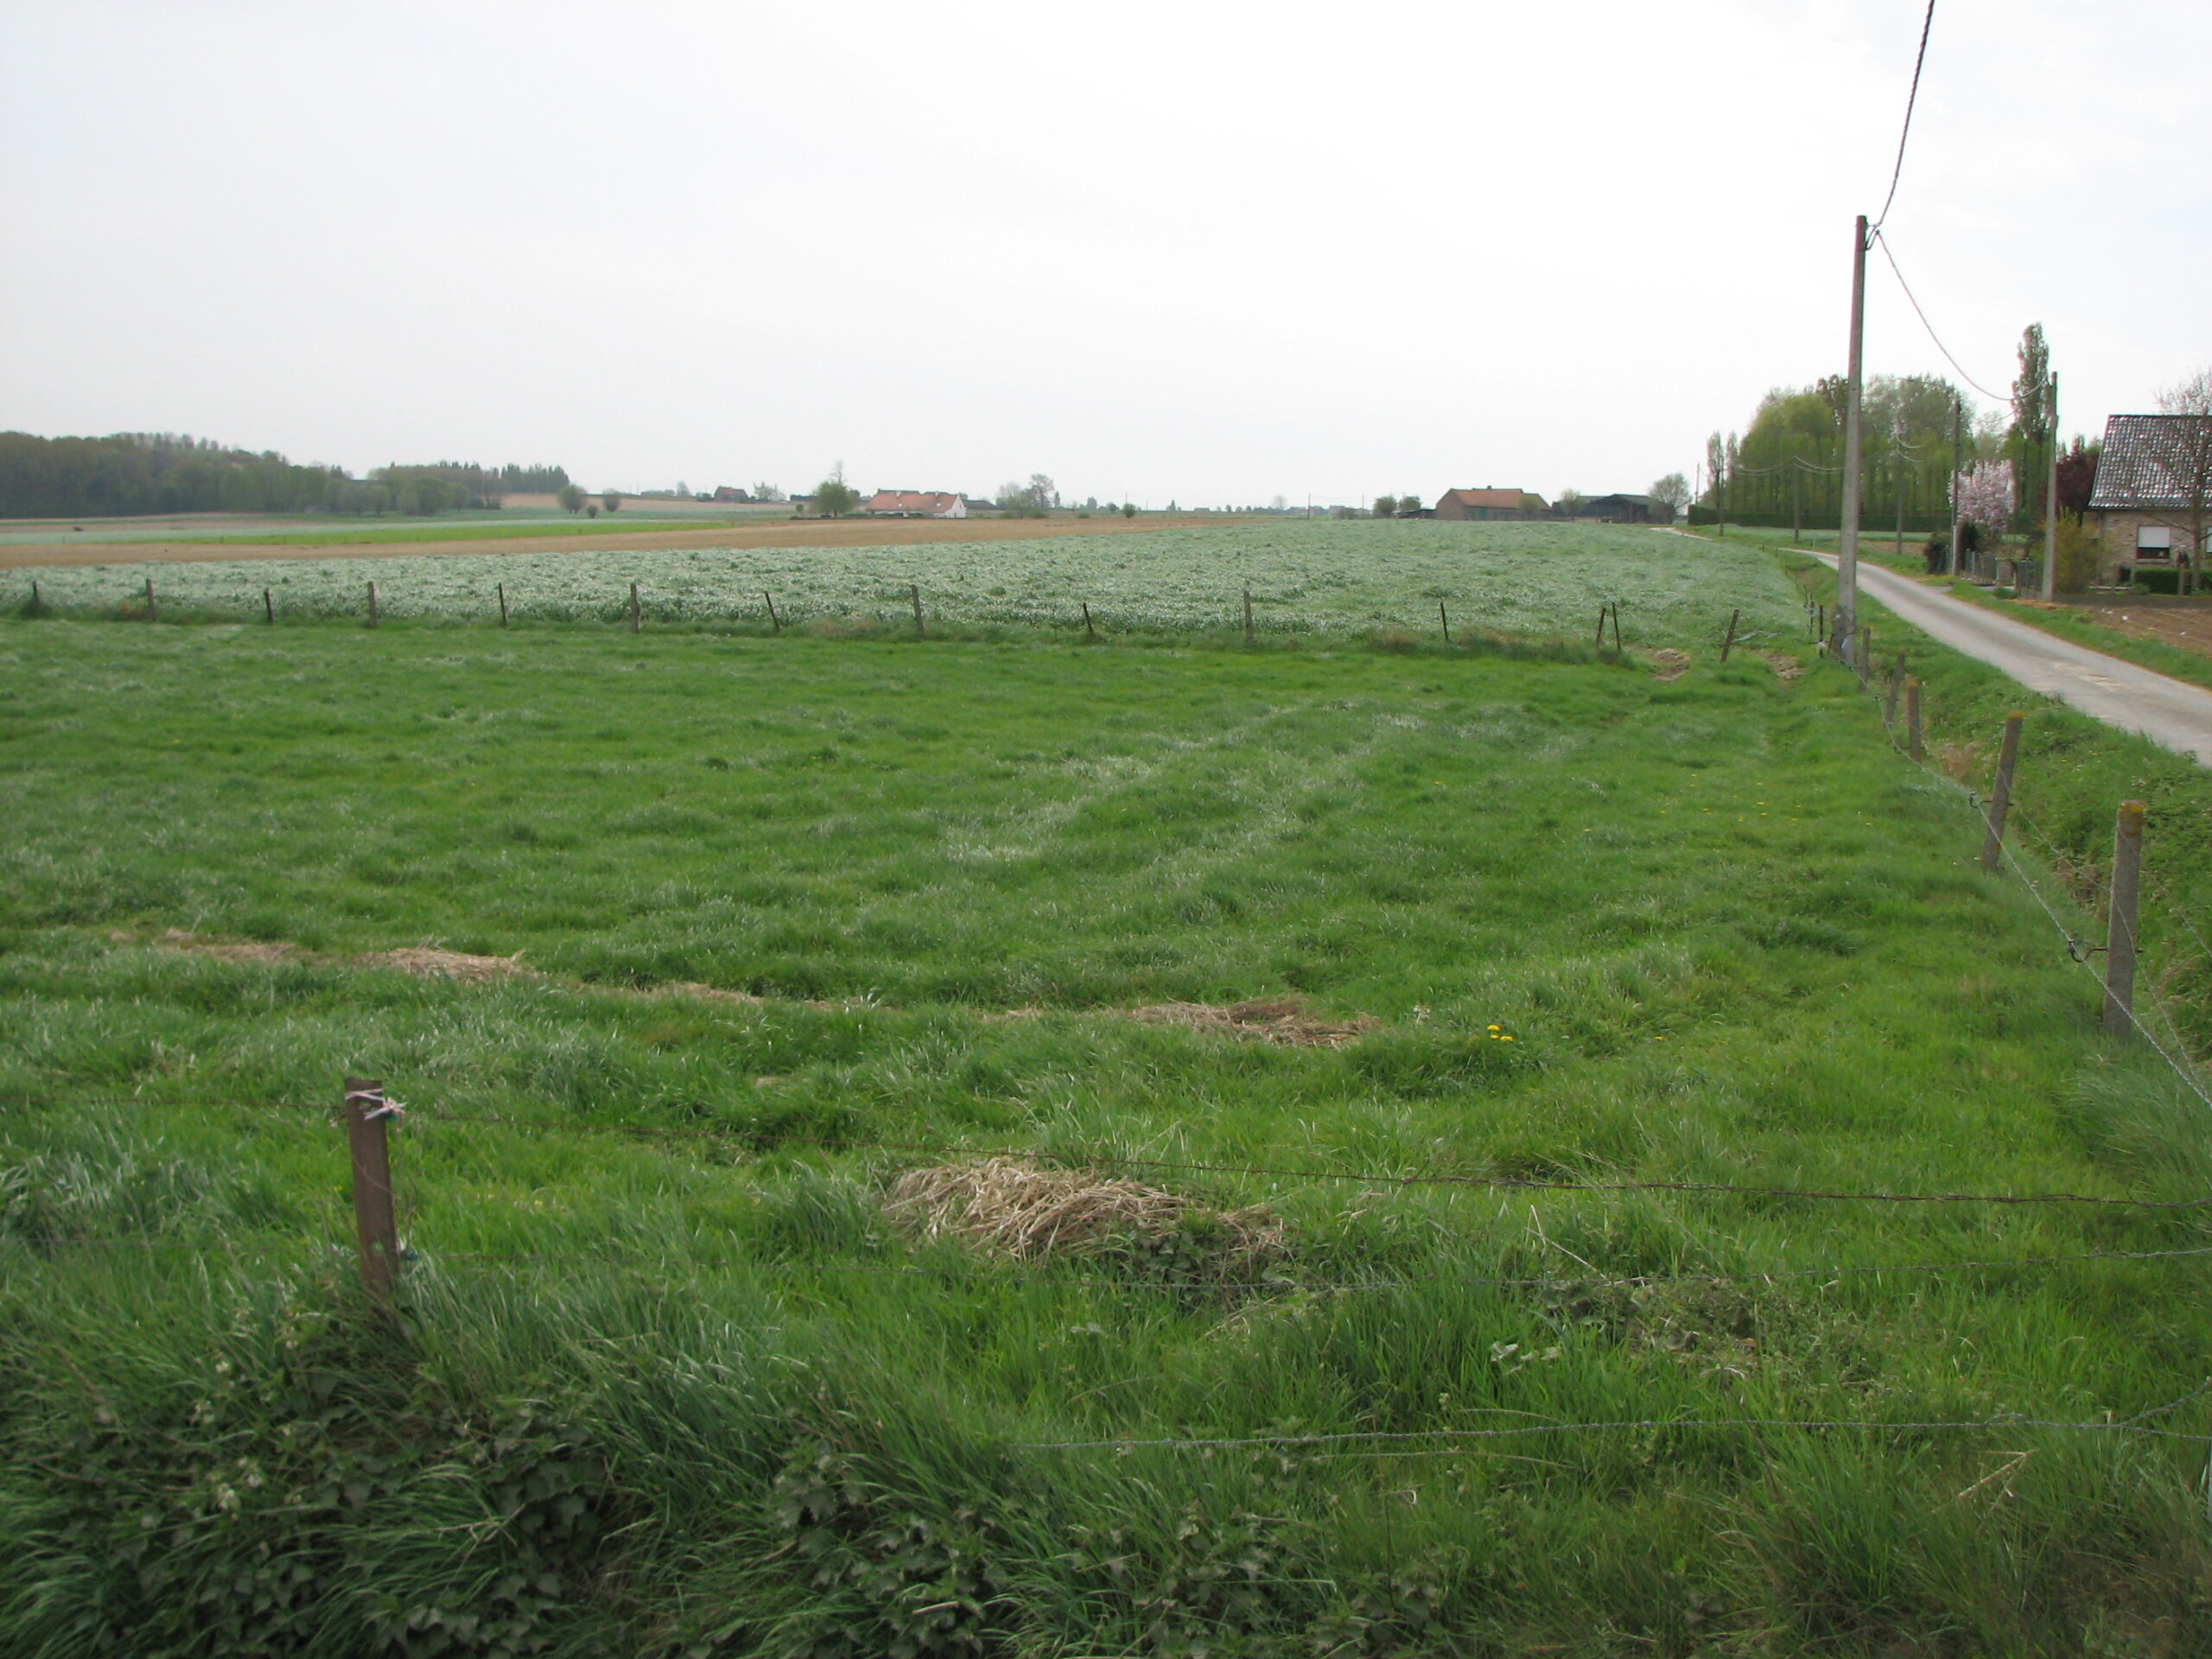 The site of the 2nd Suffolks trenches on 16th January 1915, the day that David was killed.  Photographed in 2007<br>The location is at the foot of the Messines Ridge near Wijtschate (Wytschaete).  The site of the German lines is out of shot to the left of the photo.<br />MA